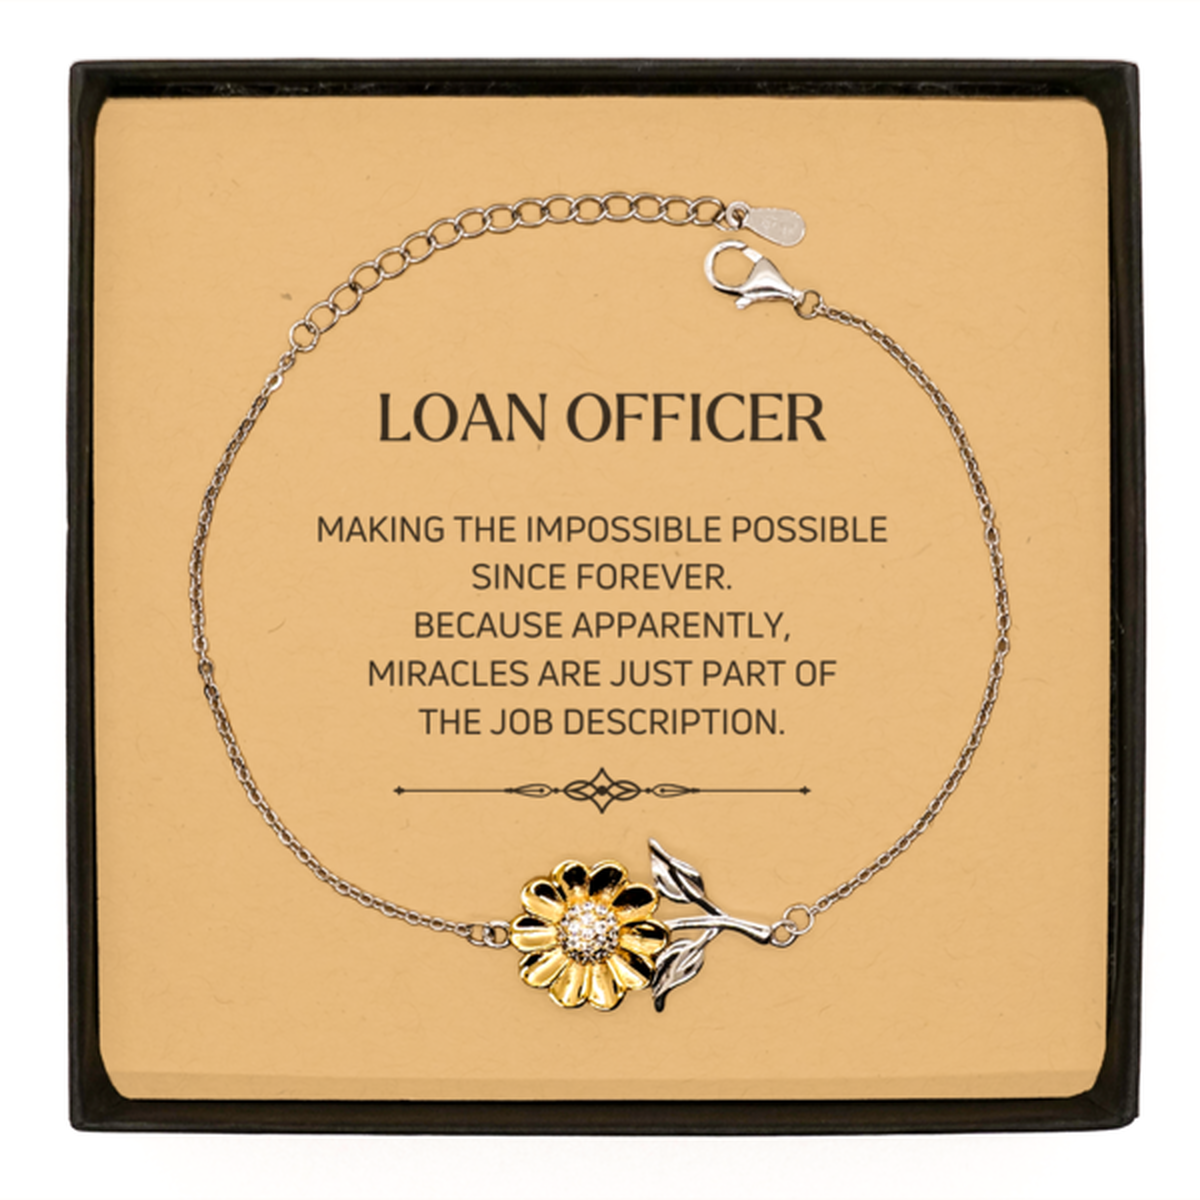 Funny Loan Officer Gifts, Miracles are just part of the job description, Inspirational Birthday Sunflower Bracelet For Loan Officer, Men, Women, Coworkers, Friends, Boss